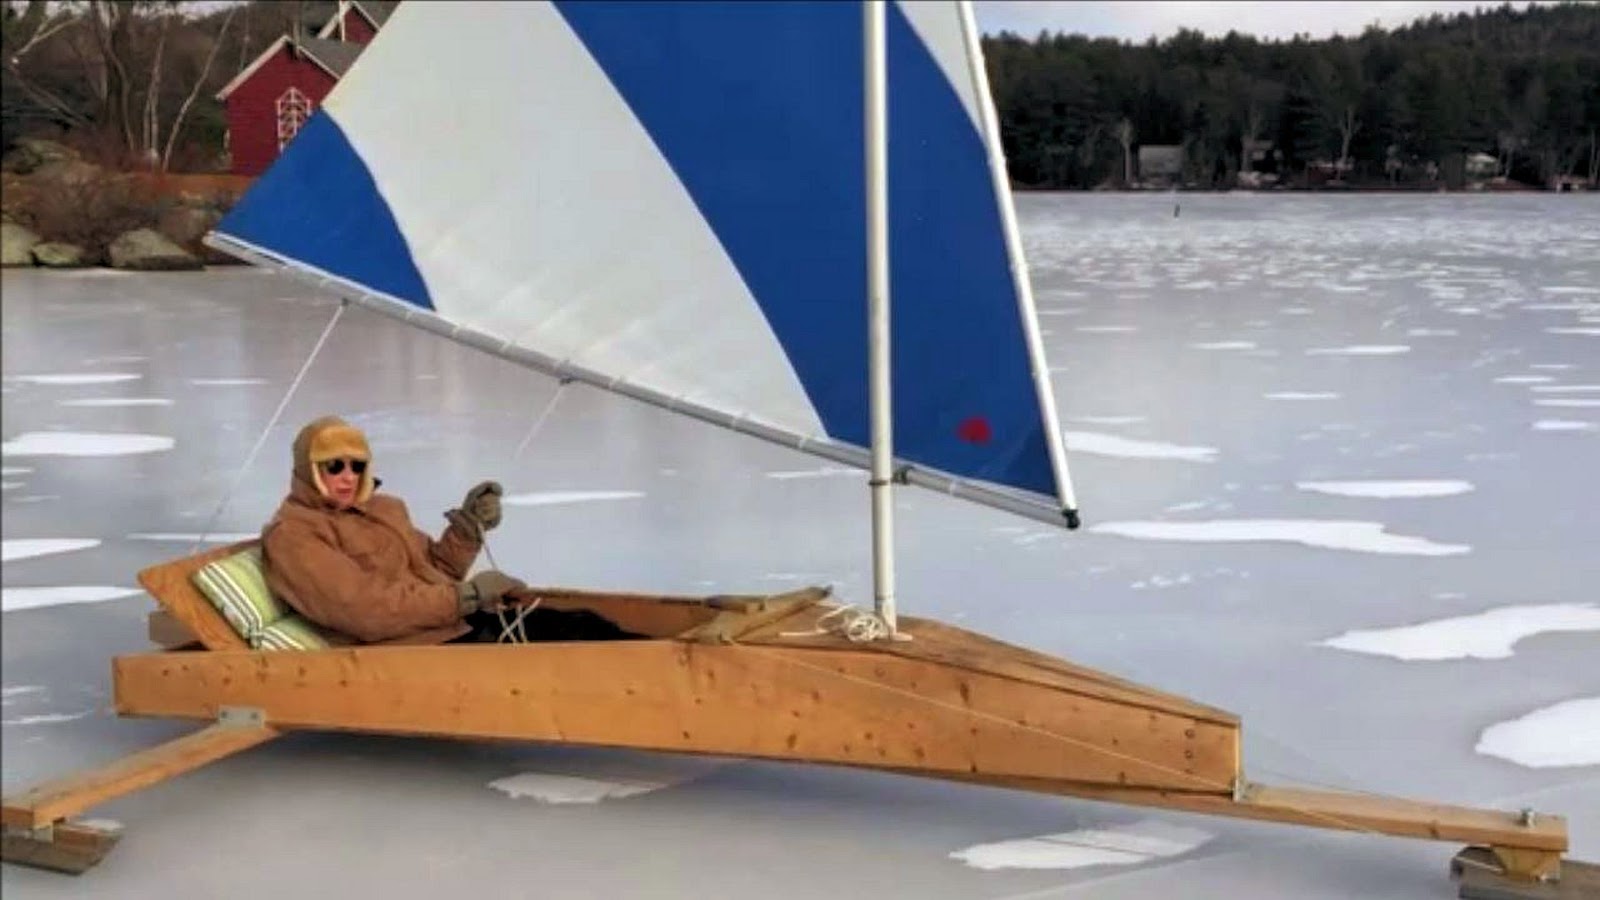 Outdoor Enthusiast: Ice Boating in New Hampshire